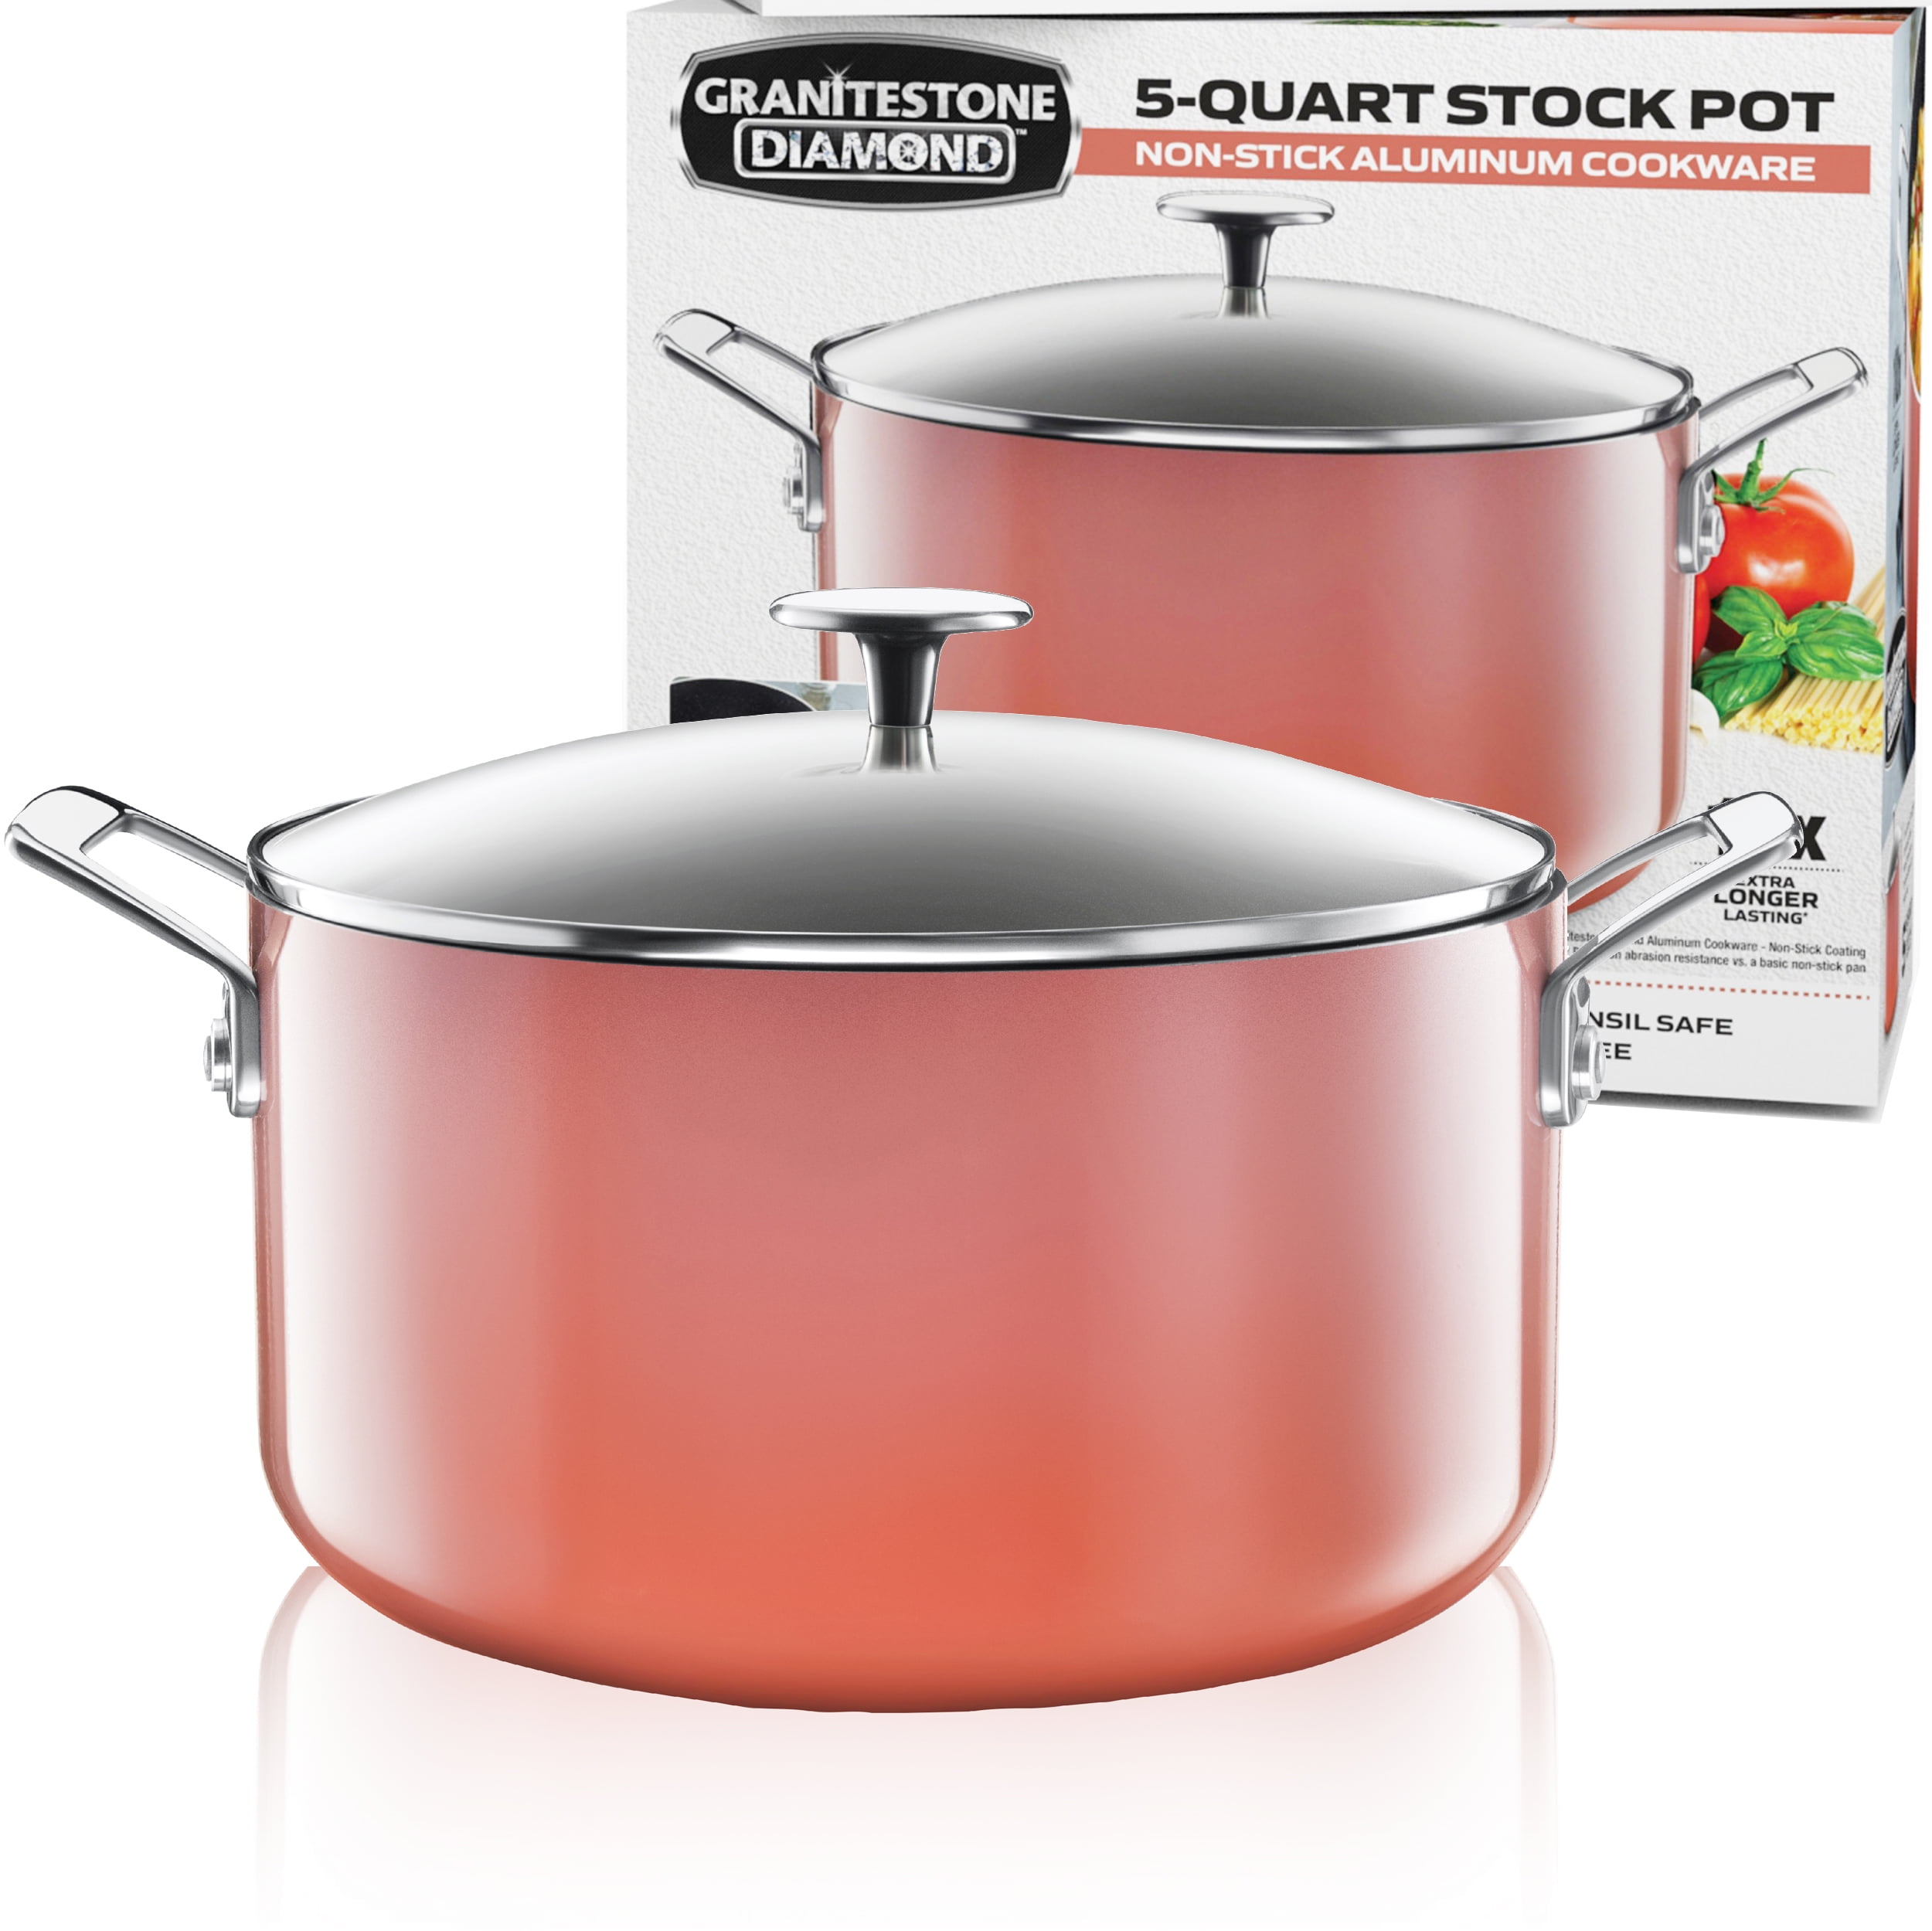 Marblestone Xylan Non-Stick 5 Quart Stock Pot with Lid